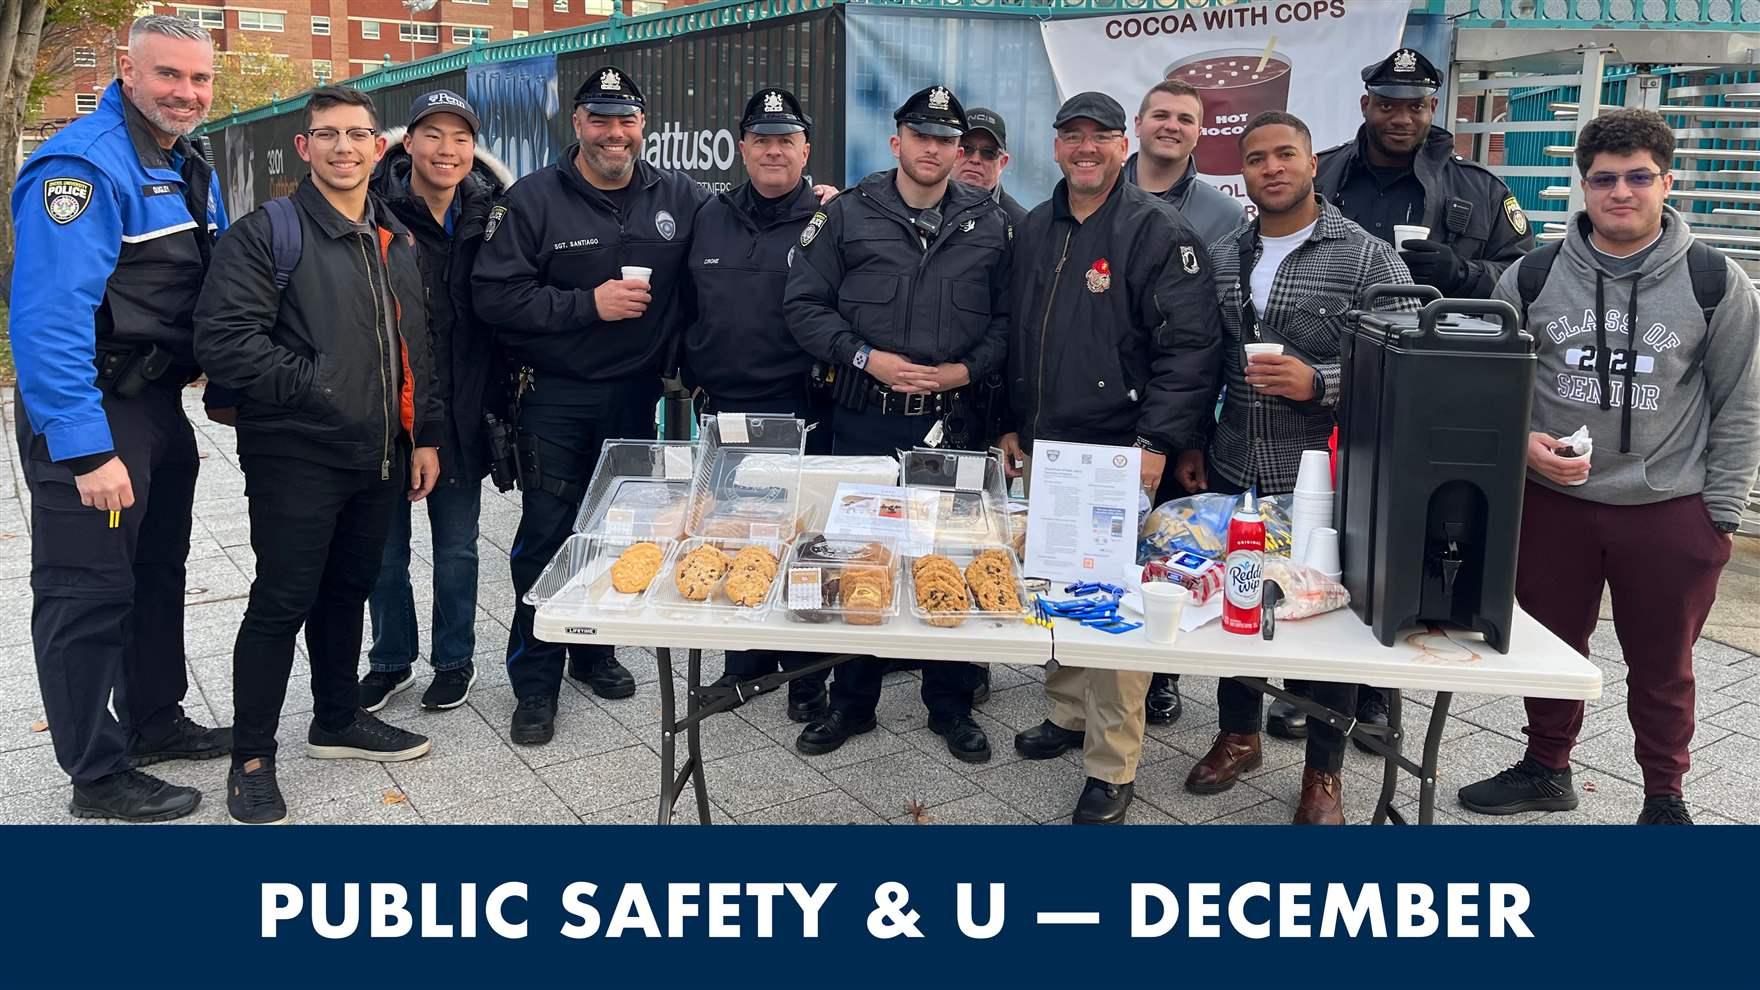 Drexel Police and a few students posing at the Nov. 27 Cookies With Cops event. Text at bottom reads Public Safety & U — December.